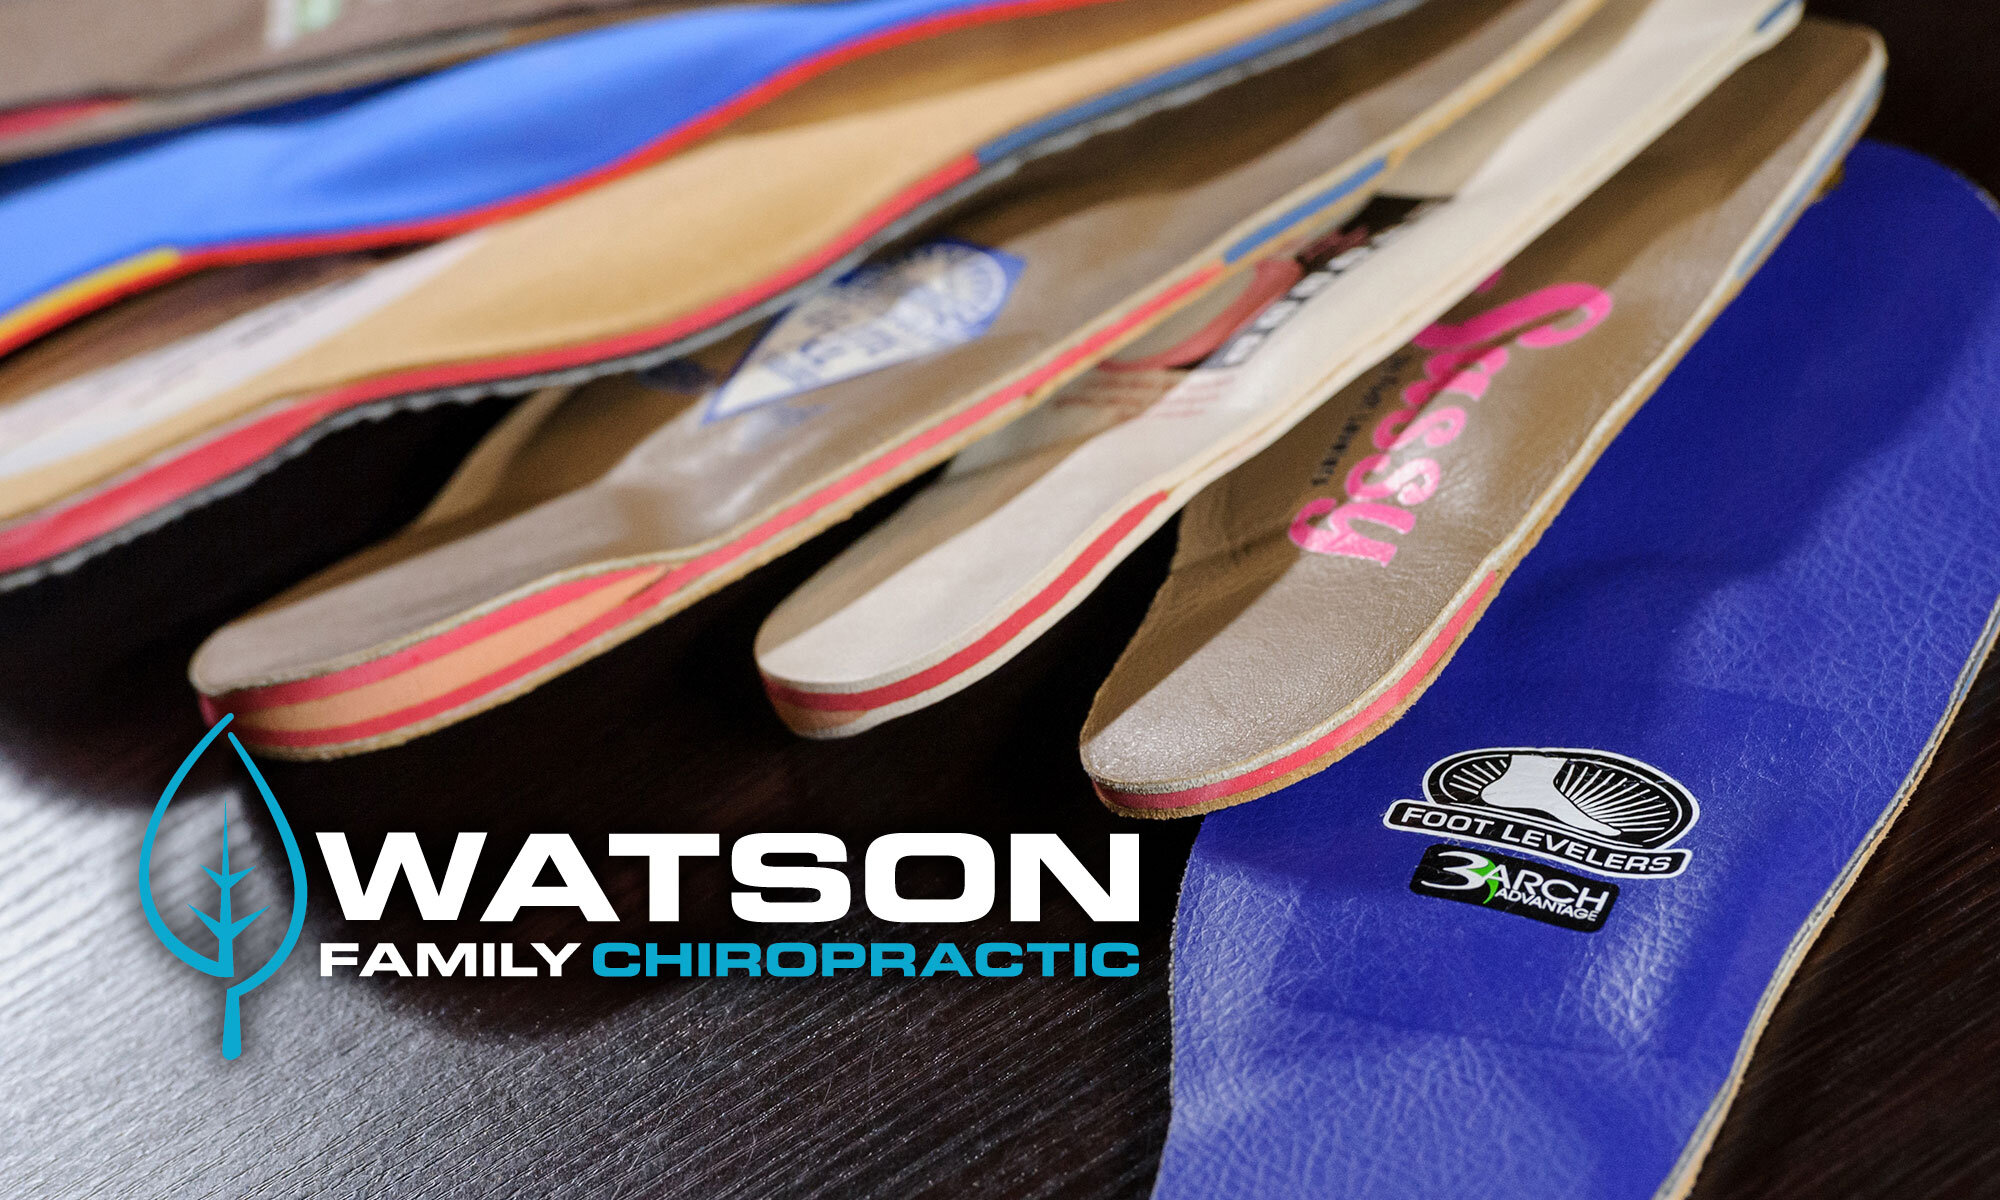  Orthodic products available at Watson Family Chiropratic 